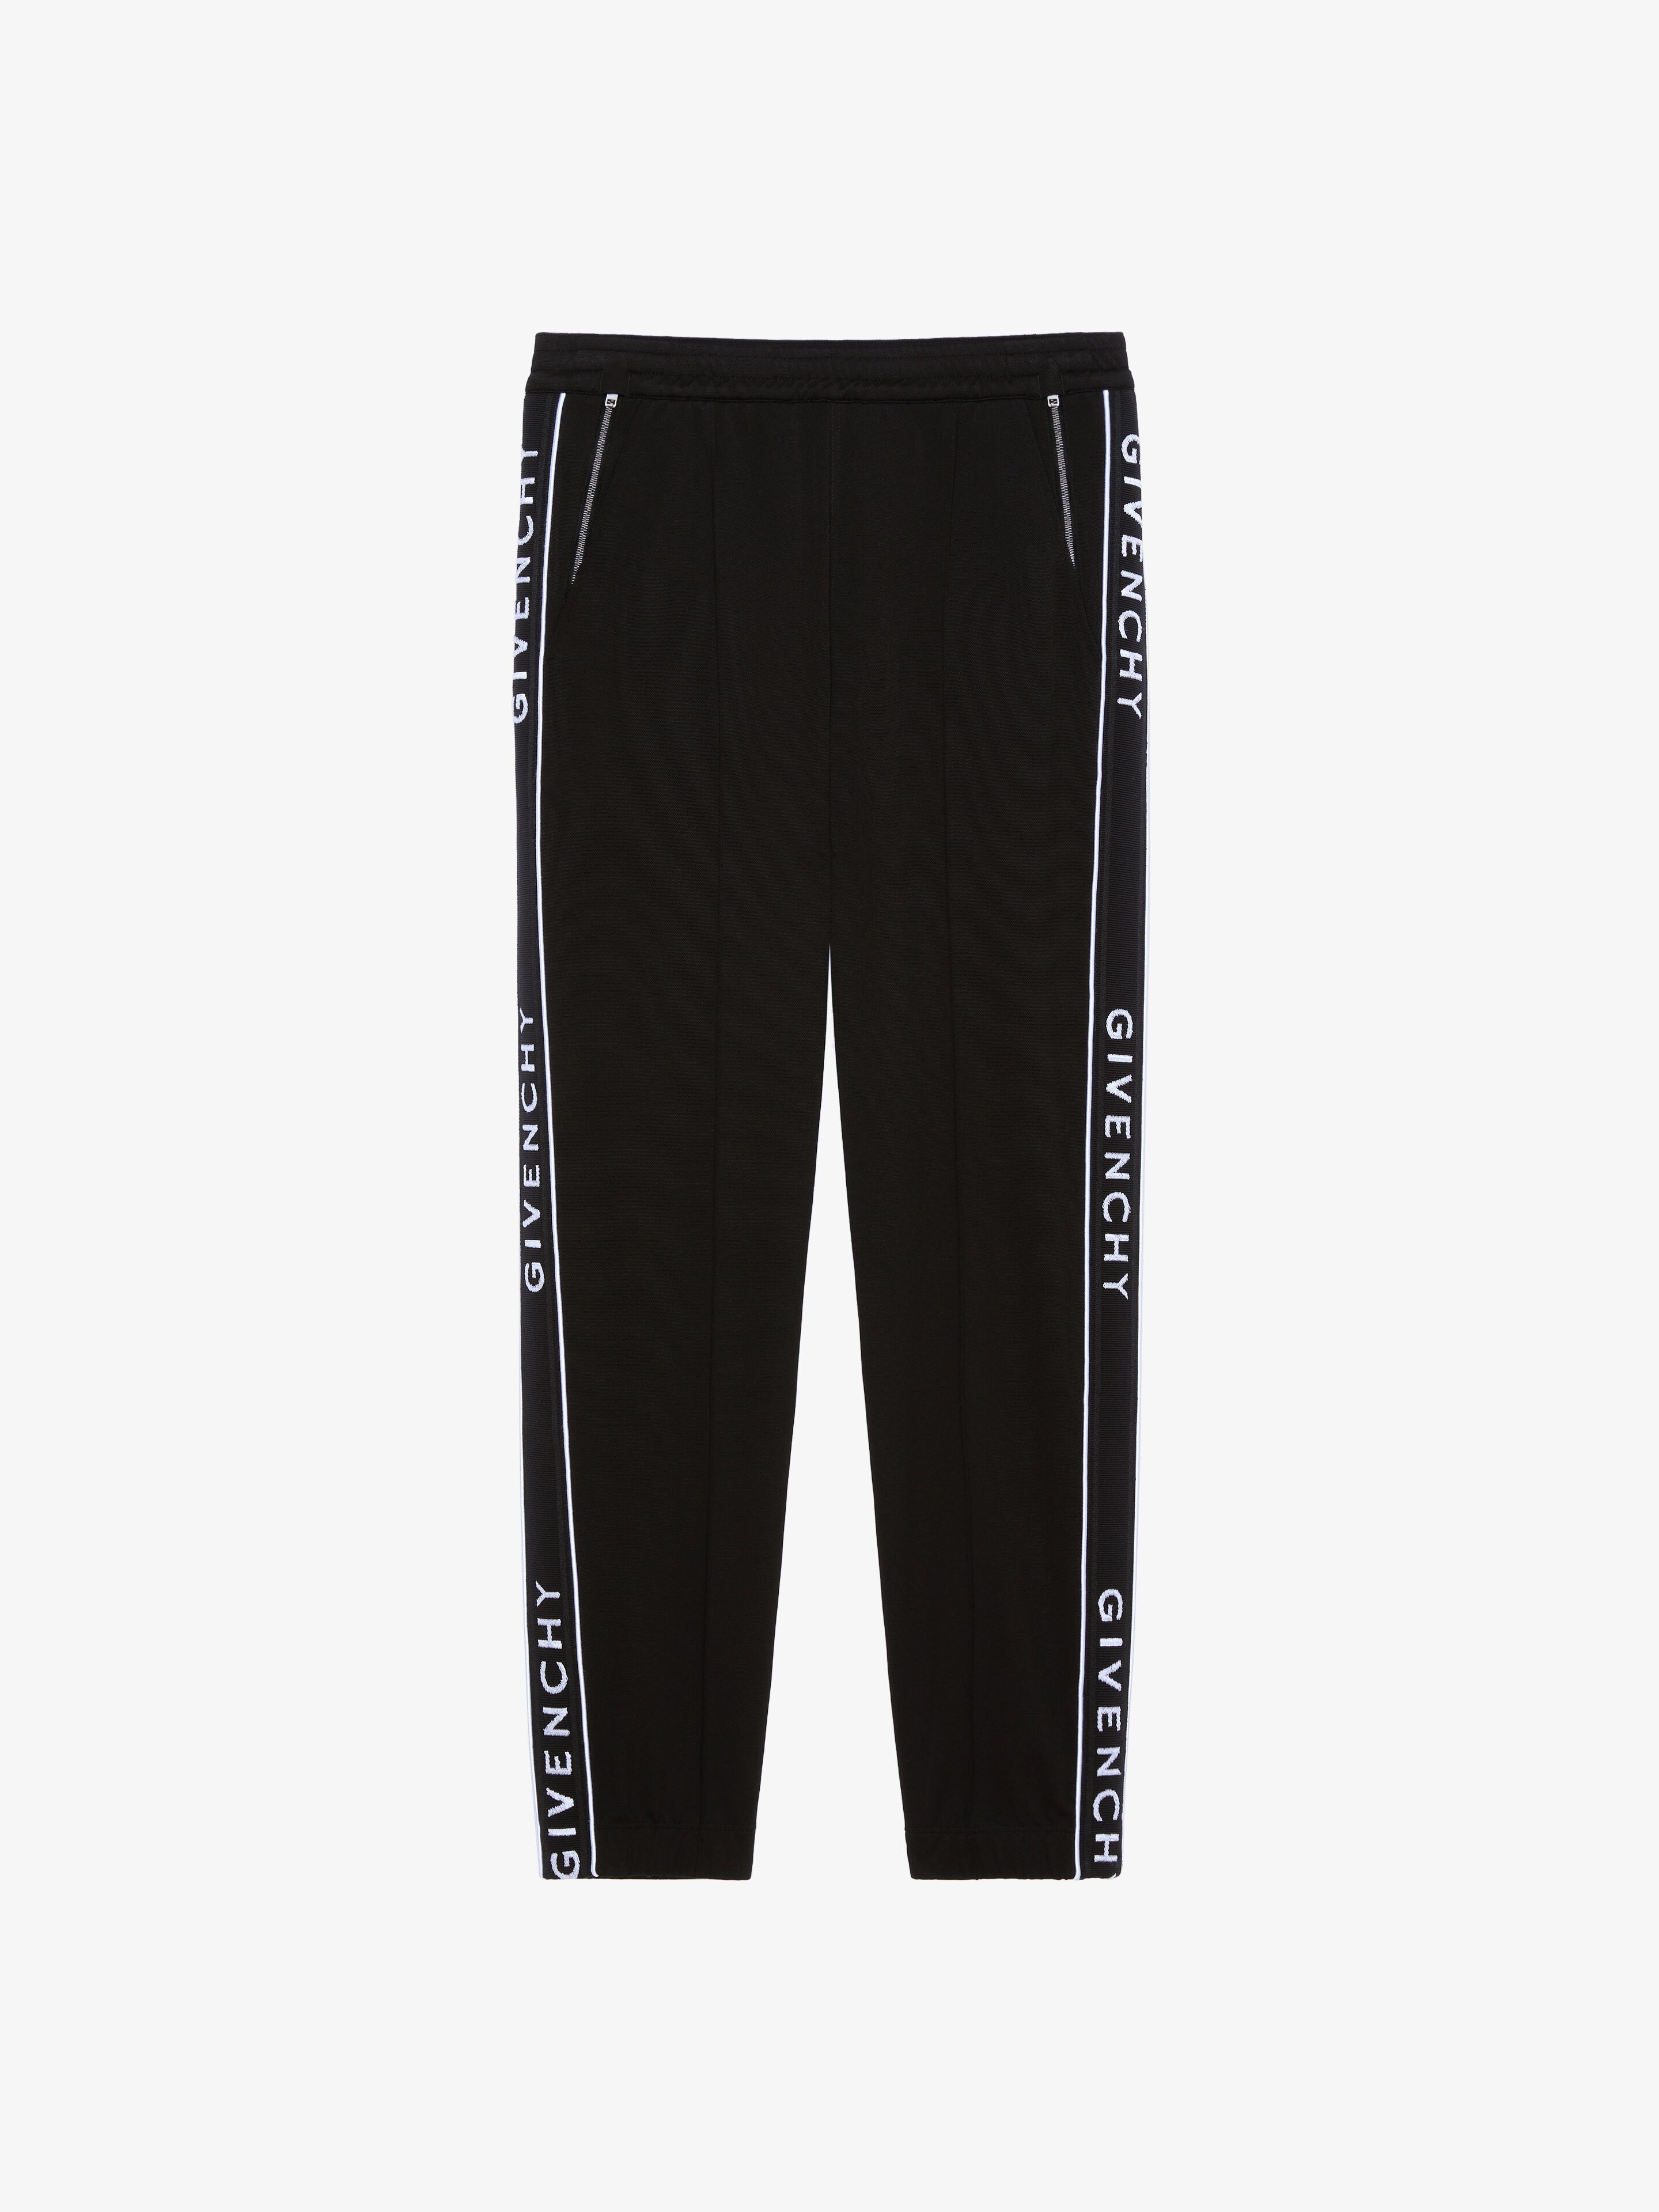 Givenchy Black and White Sporty Leggings Givenchy